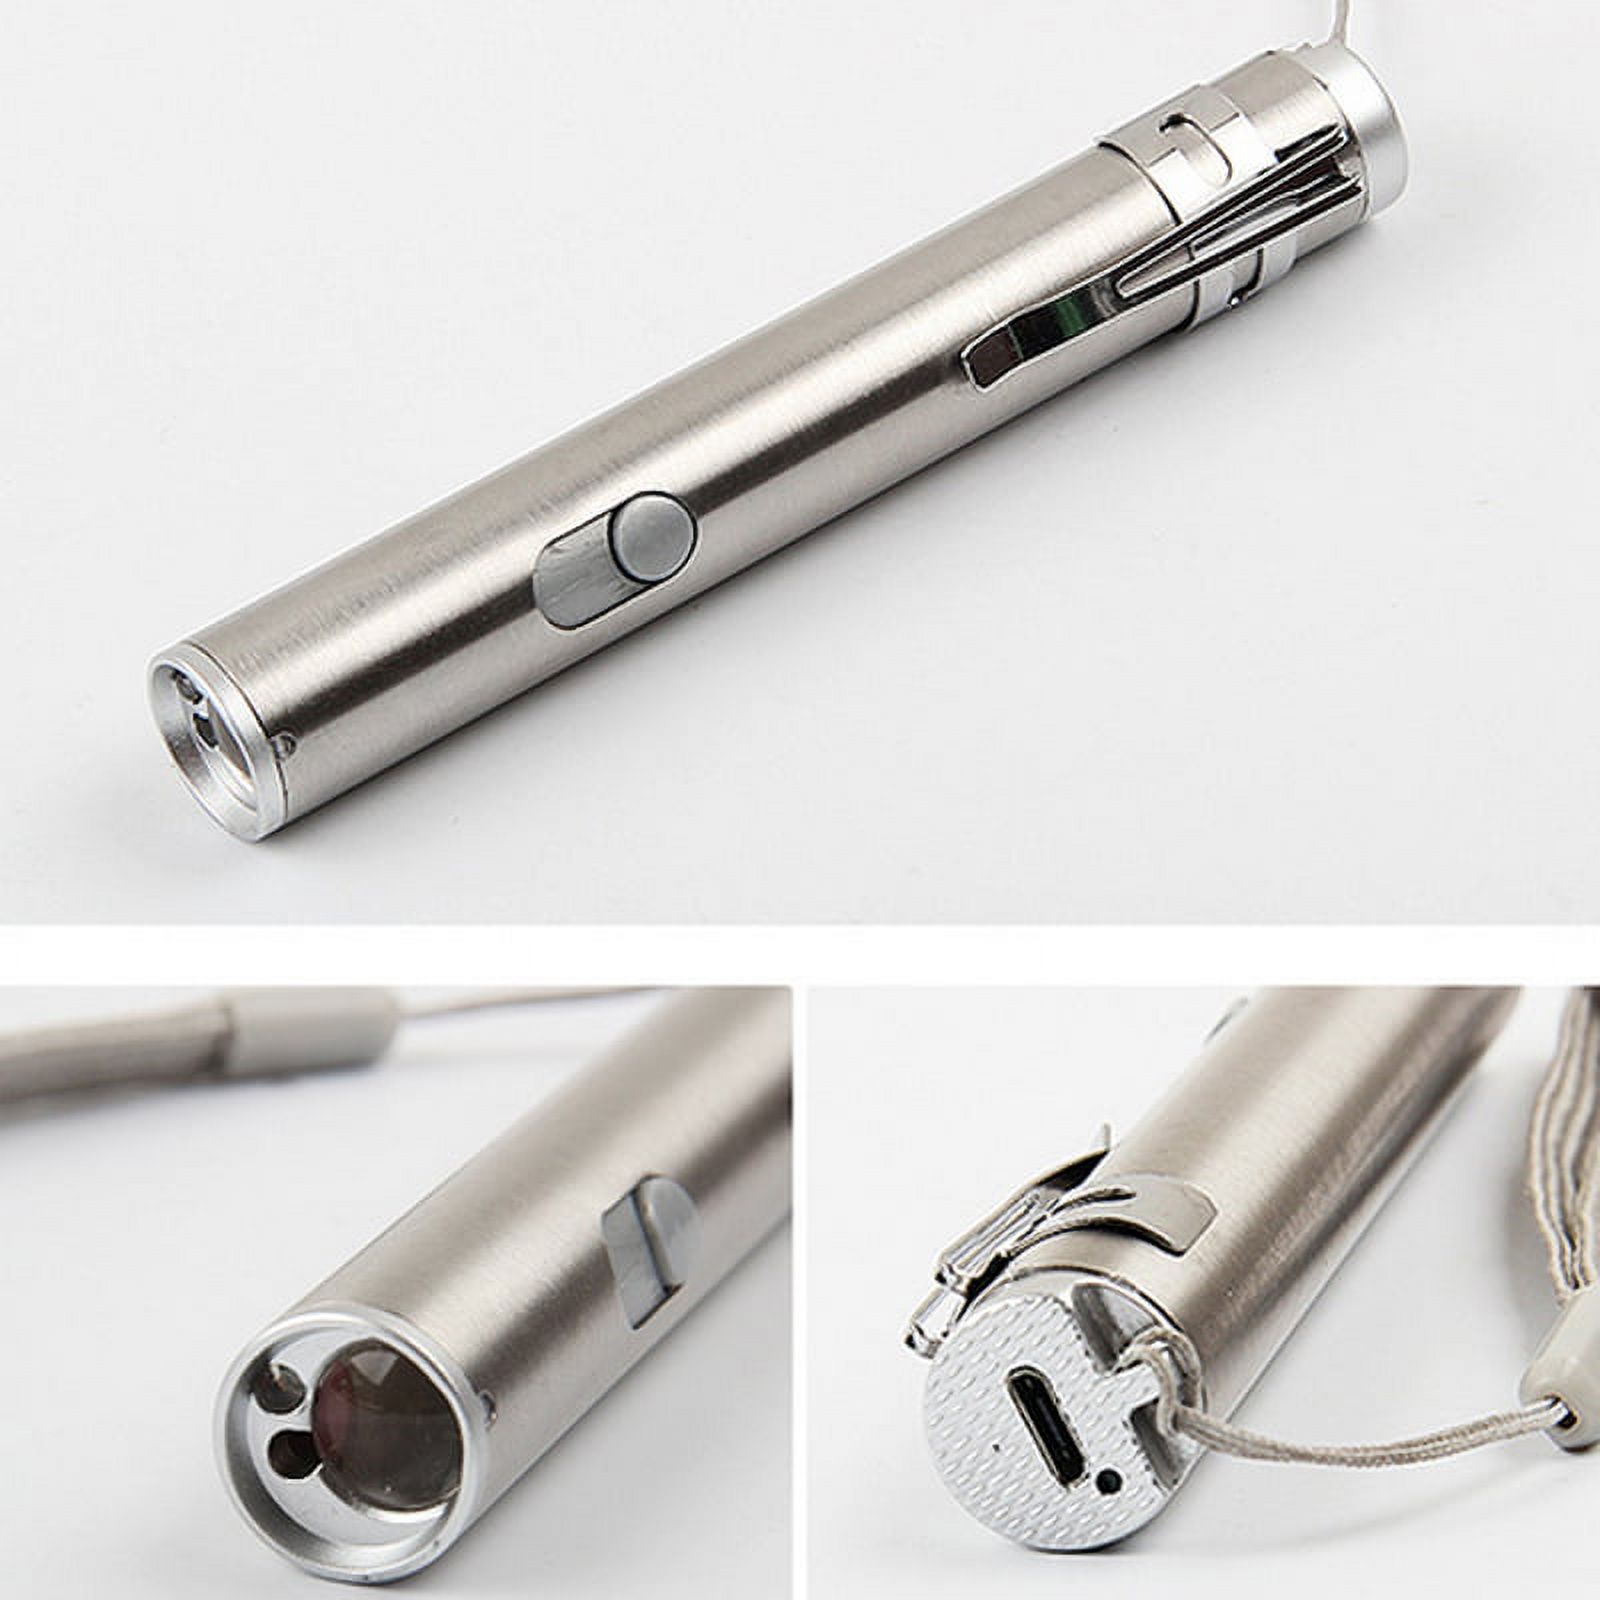 New 3 in1 Mini USB Rechargeable LED Laser UV Torch Pen Flashlight Multifunction Lamp - image 2 of 8